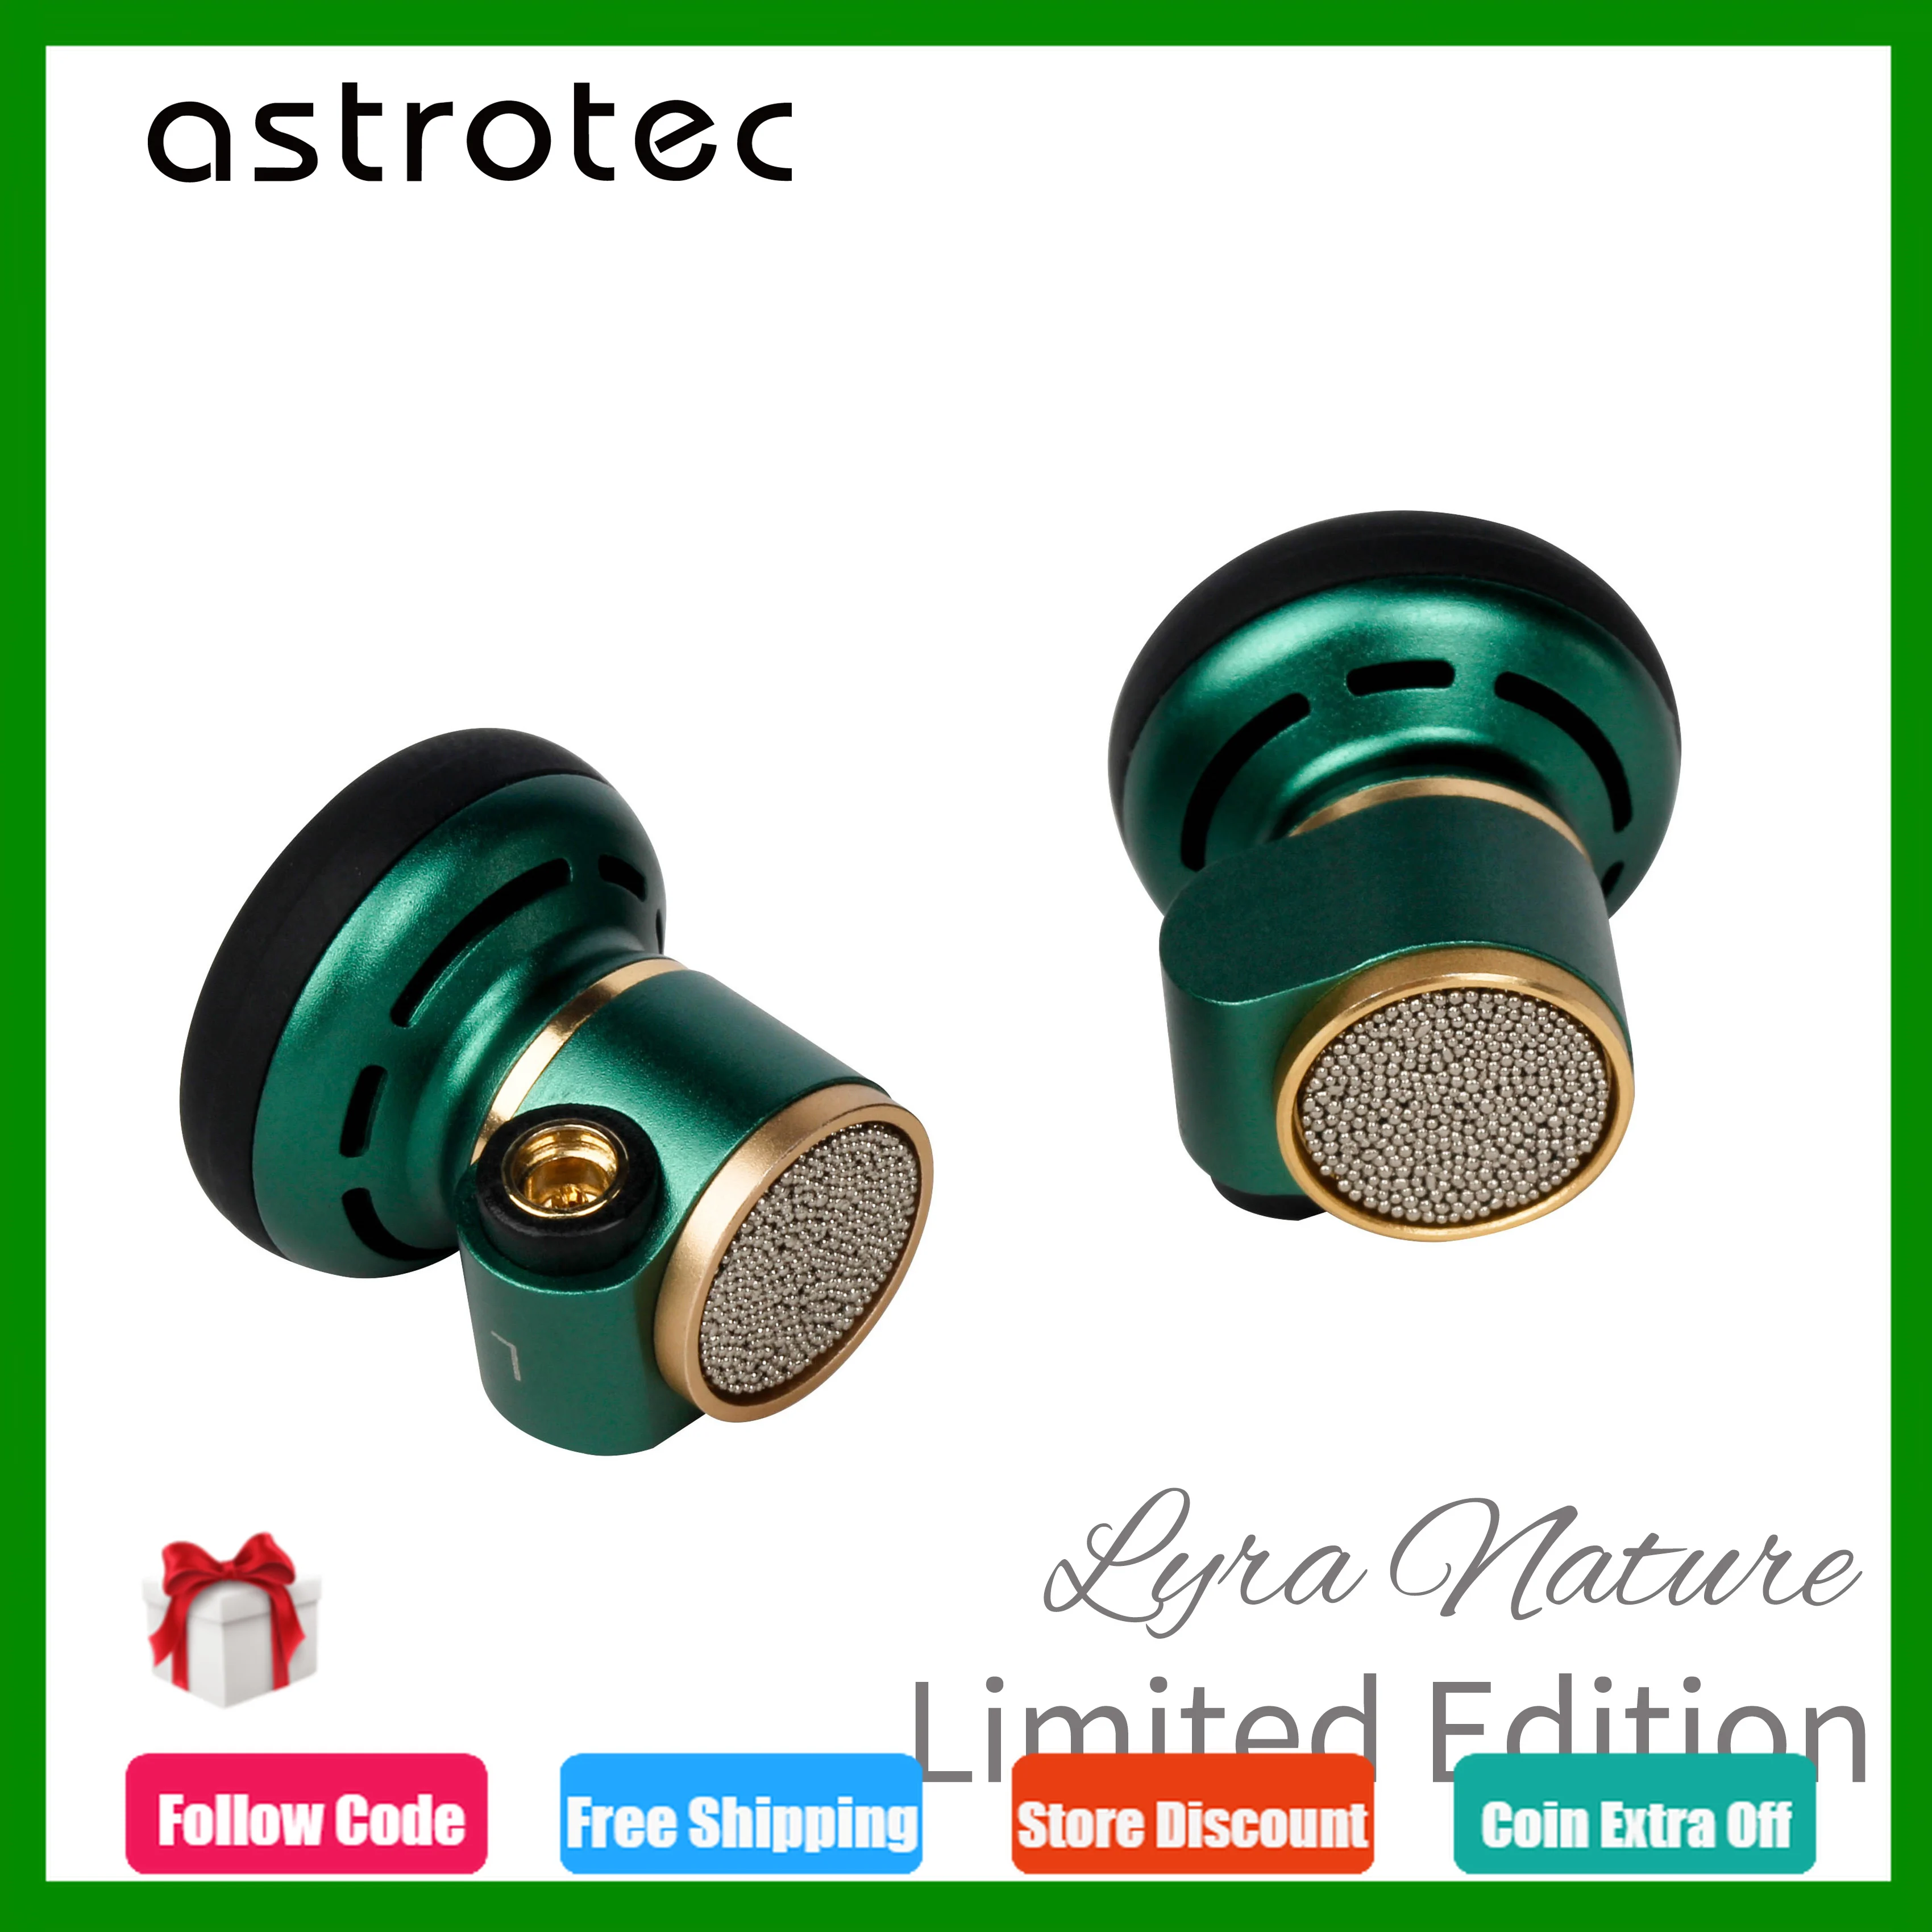 

Astrotec Lyra Nature Limited Edition MMCX Detachable High Resolution Earbuds